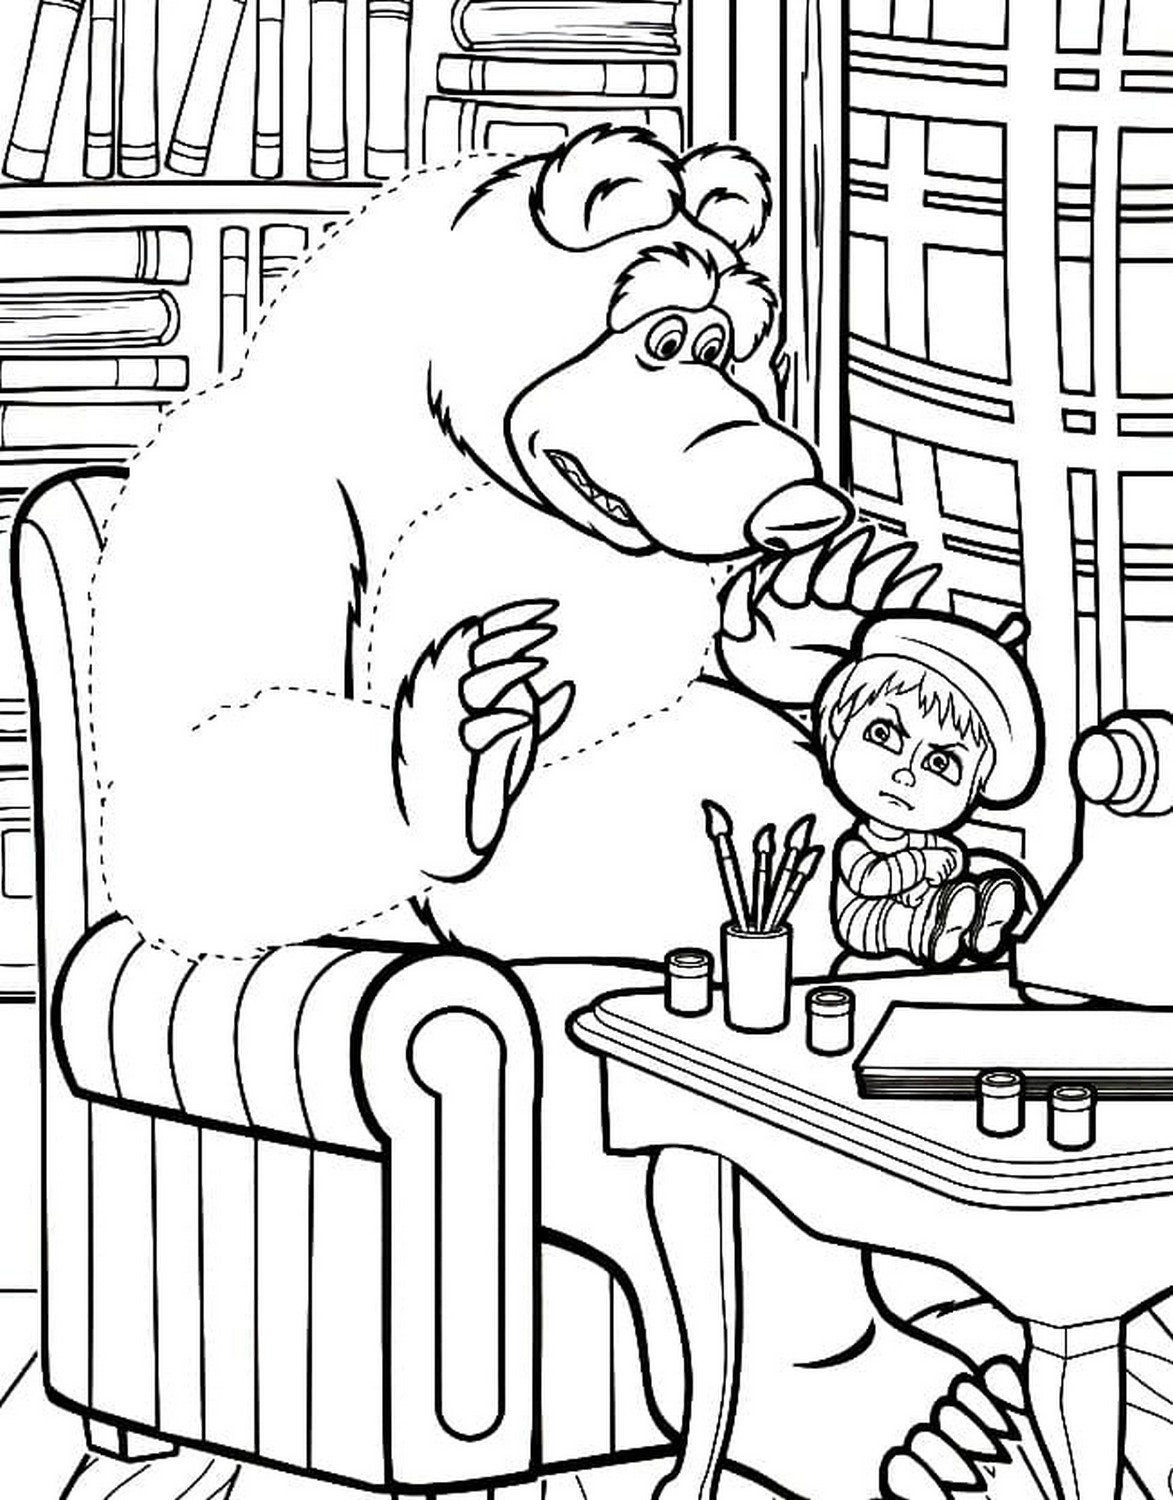 Mascha und der Br 54  coloring page to print and coloring